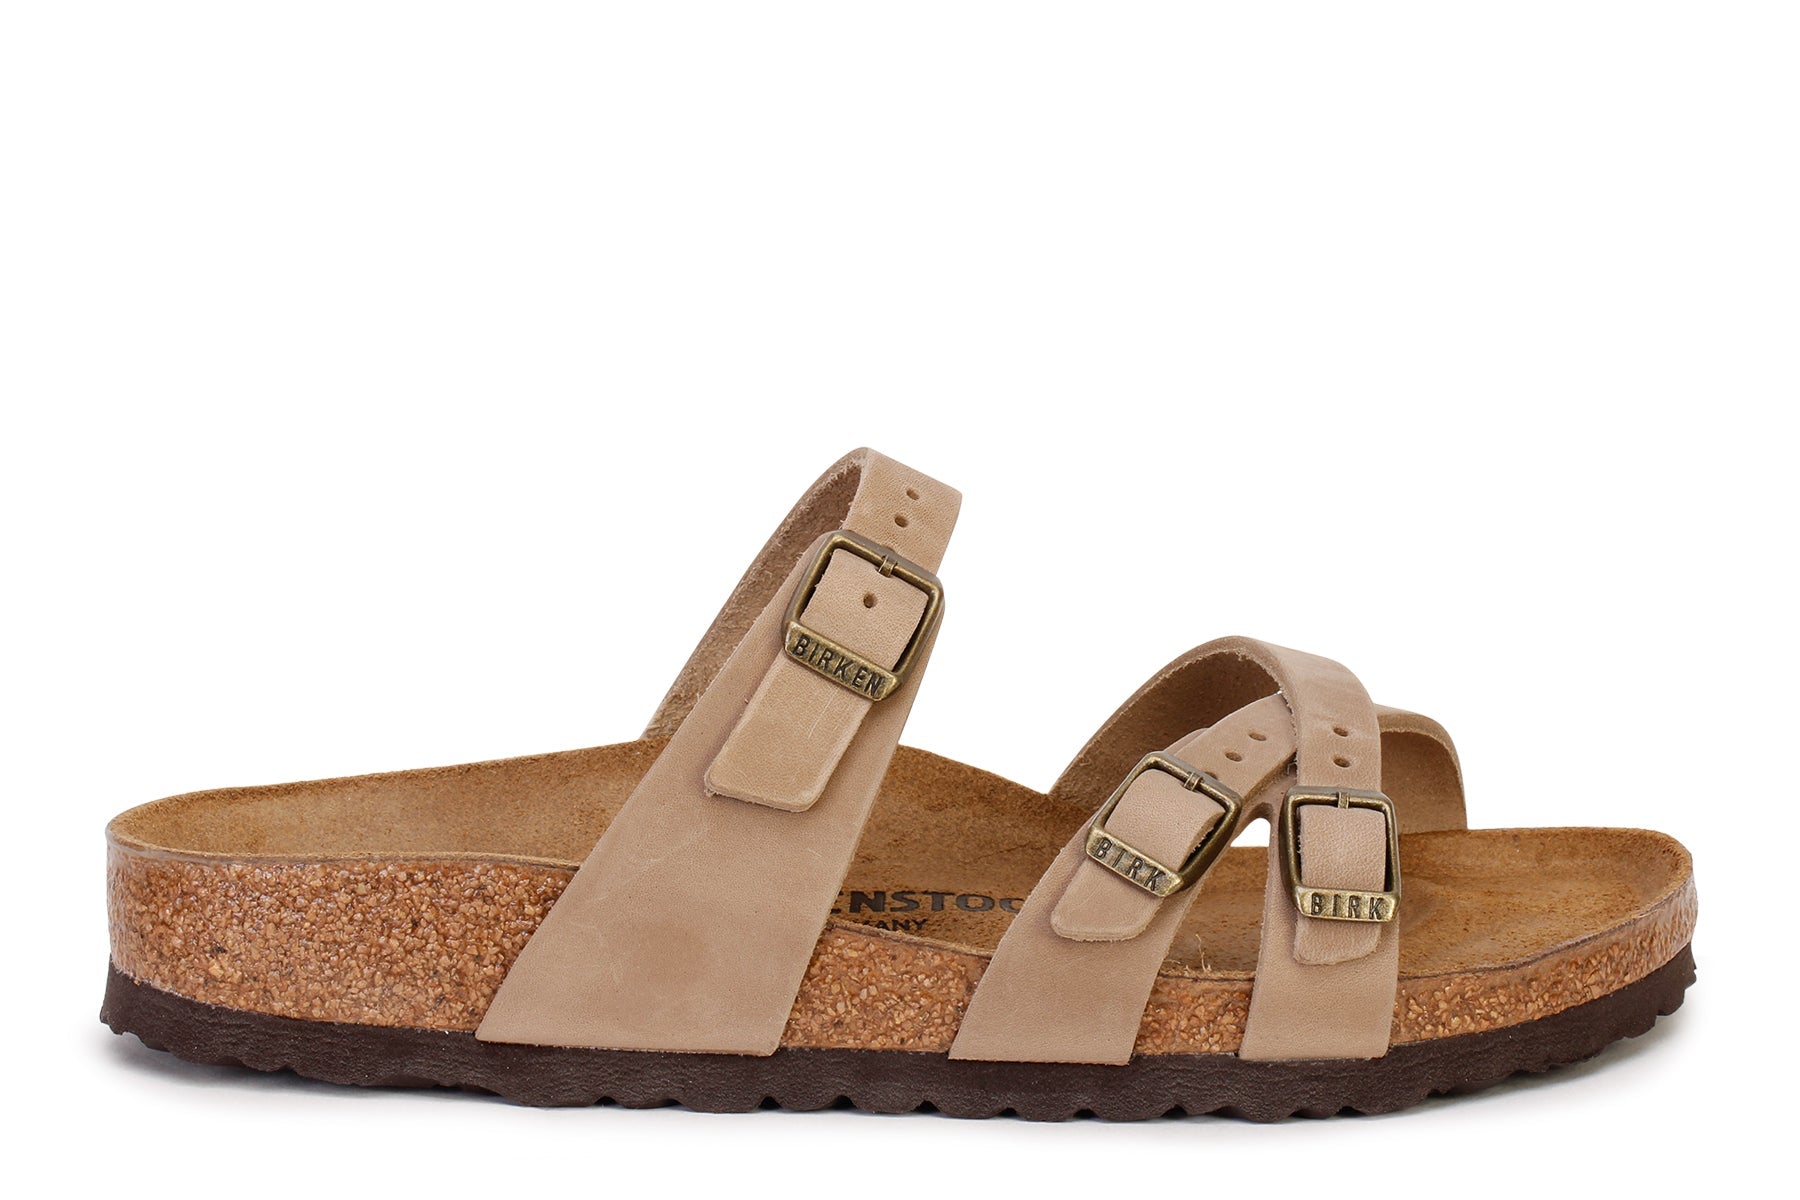 BIRKENSTOCK Gizeh Oiled Leather Sandals - Habana and Iron